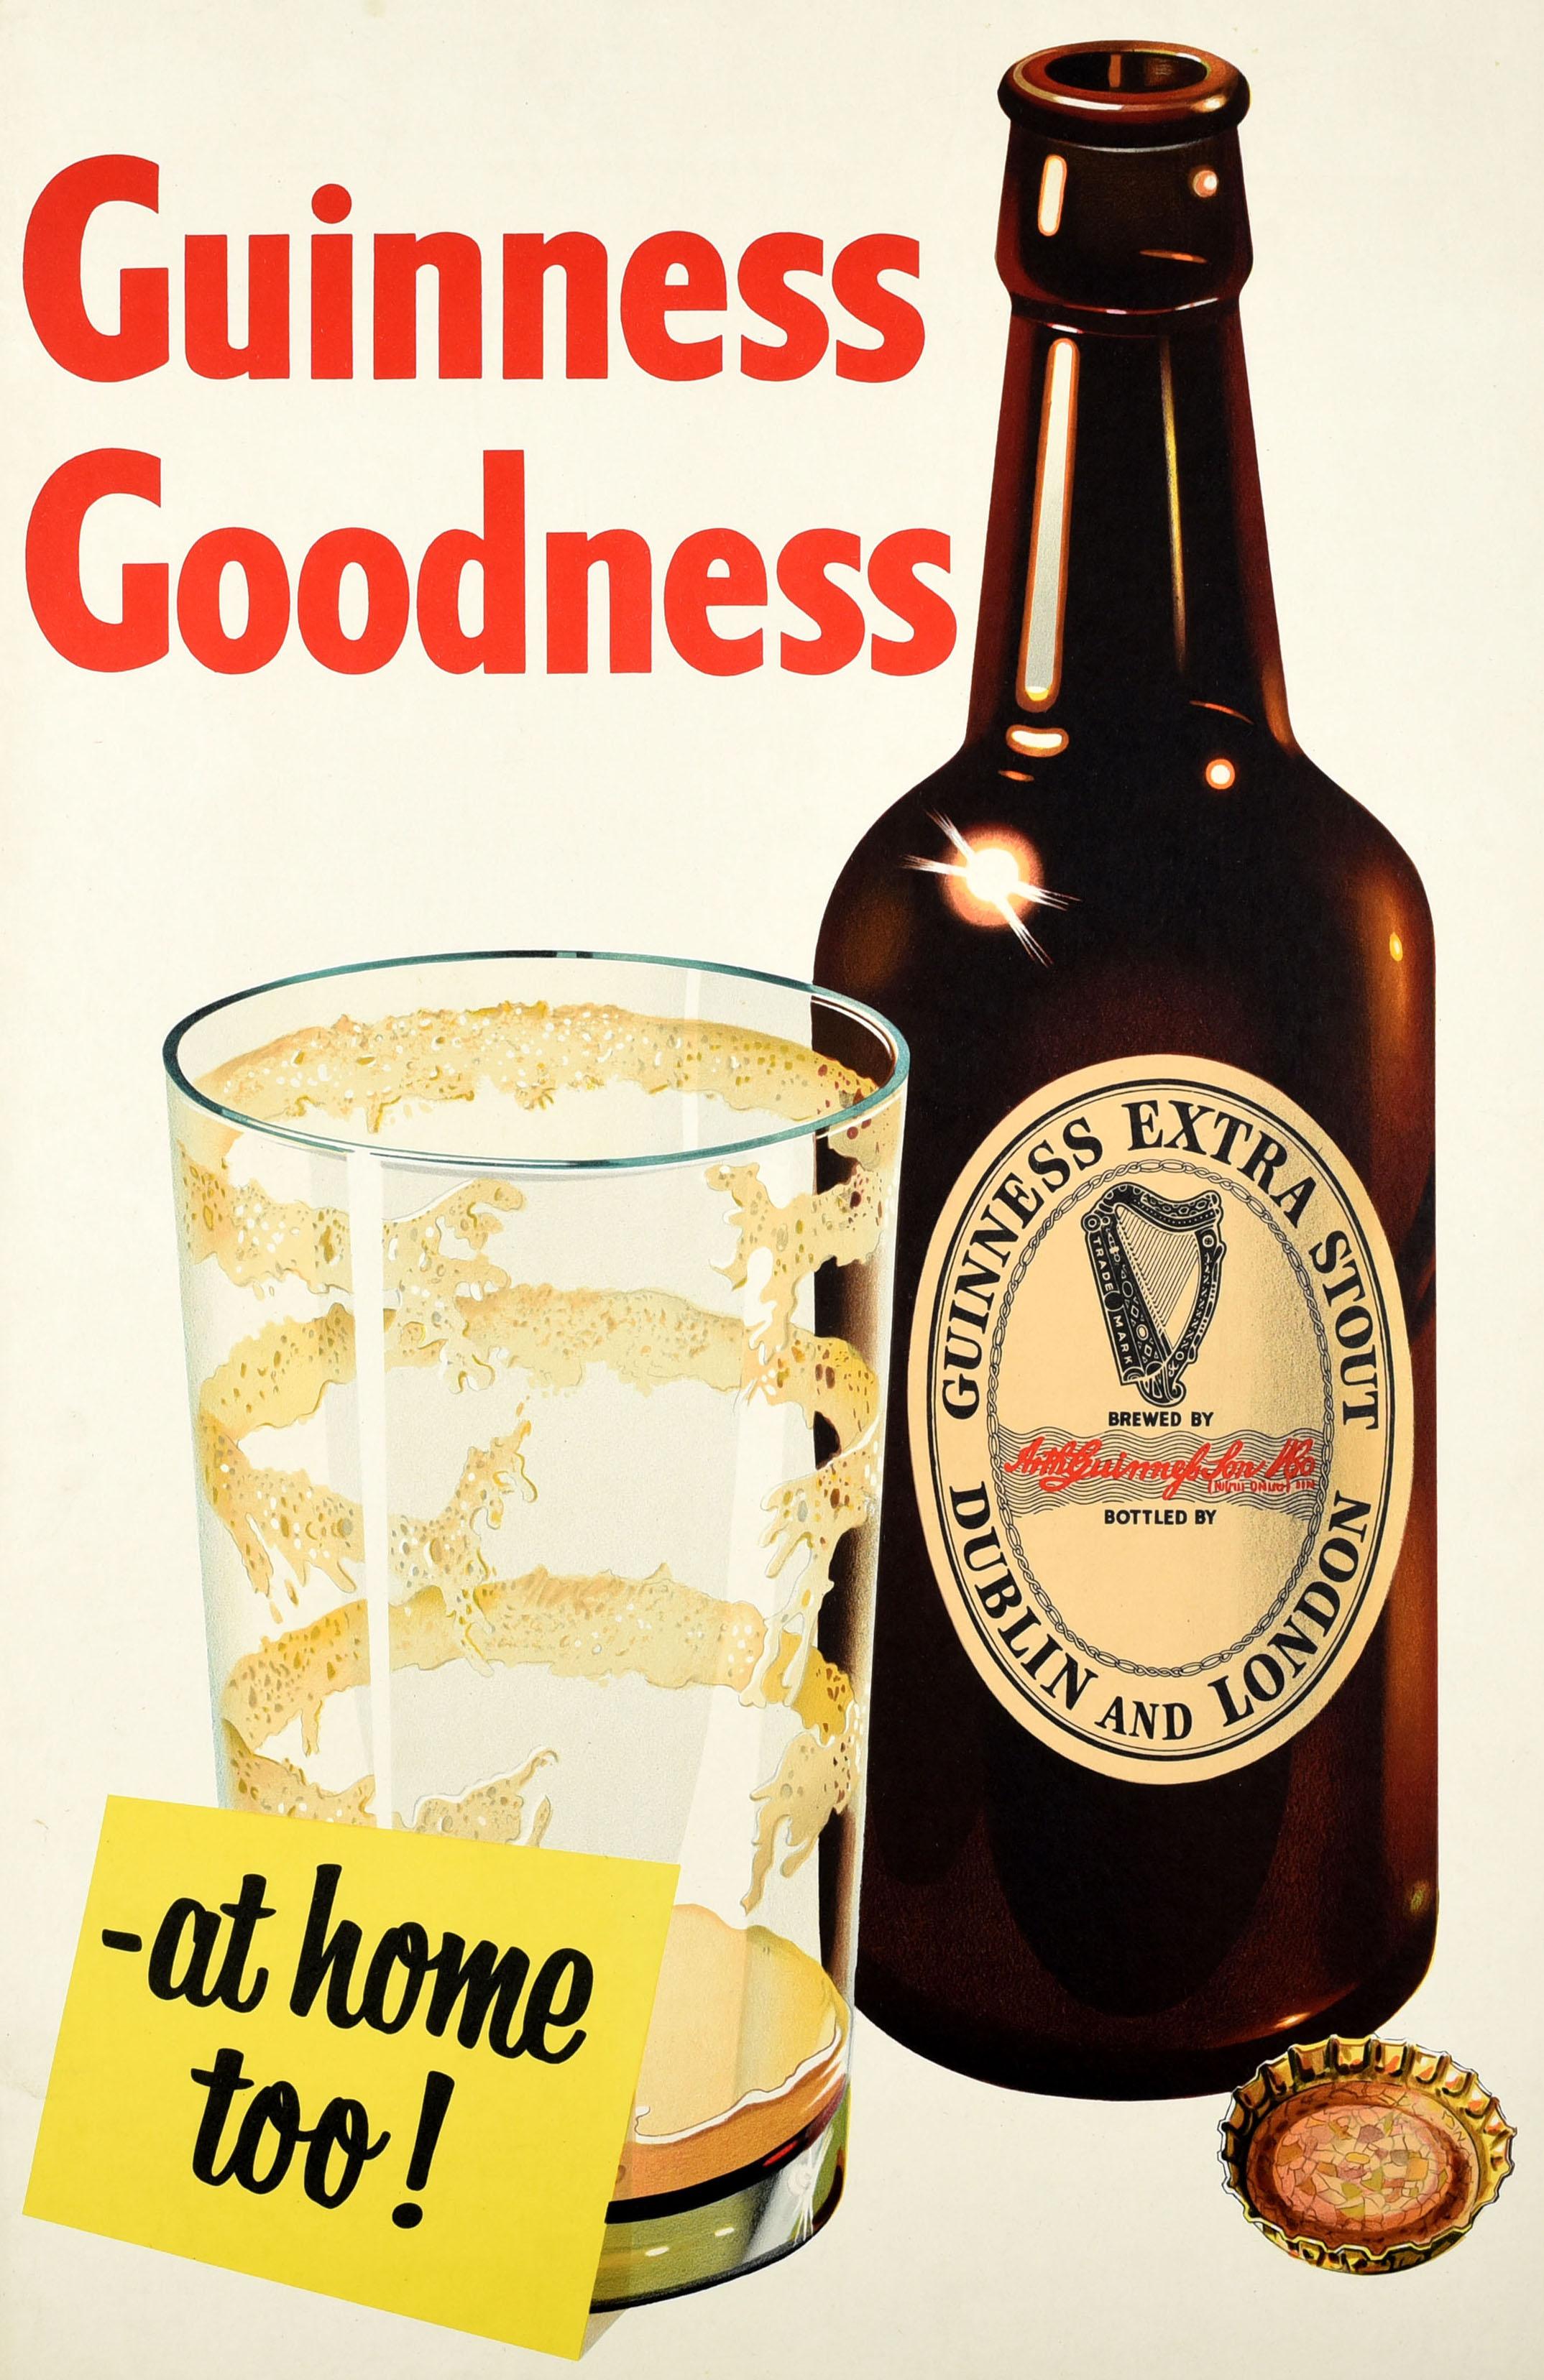 Original Vintage Advertising Poster Guinness Goodness Irish Stout Beer Alcohol - Print by Unknown